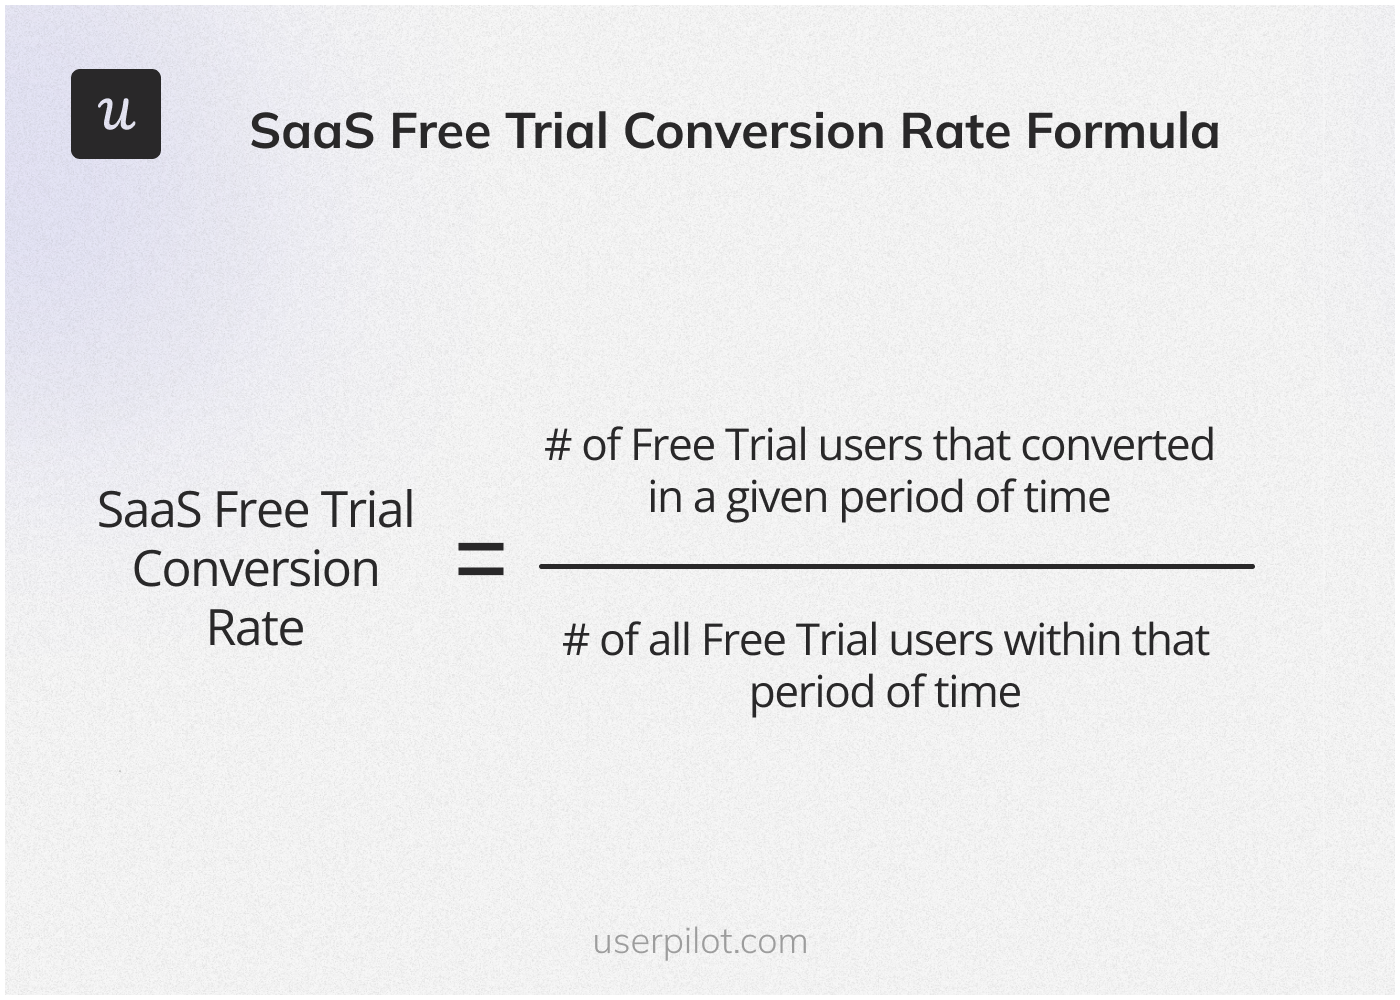 Saas free trial conversion rate calculation